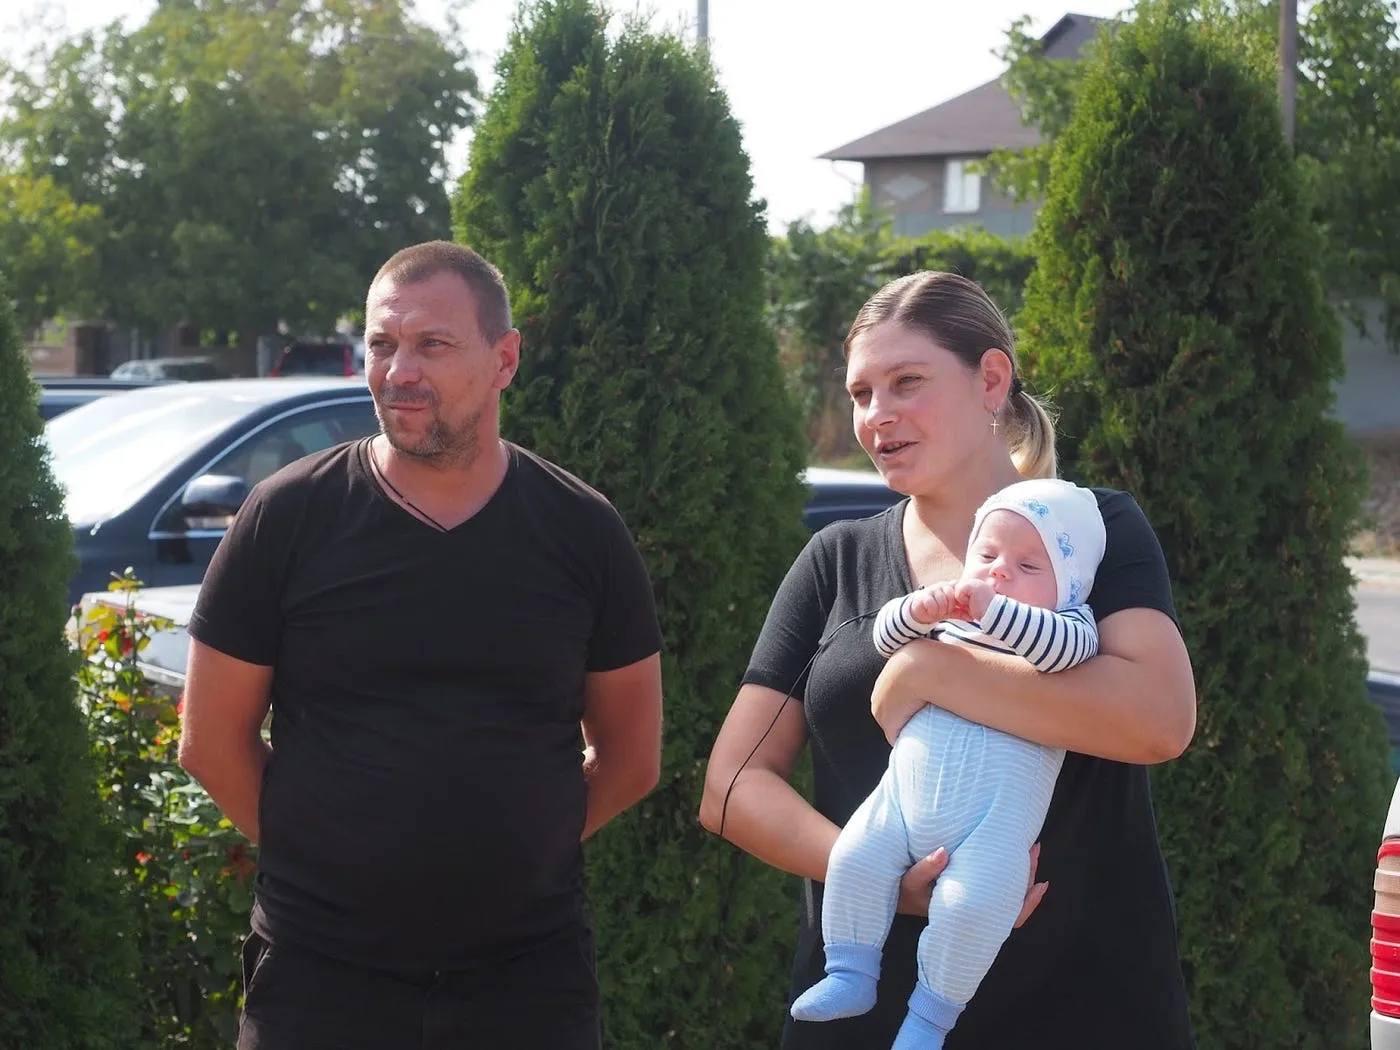 A family from the Odesa region tries to stay positive and dreams about moving back home.